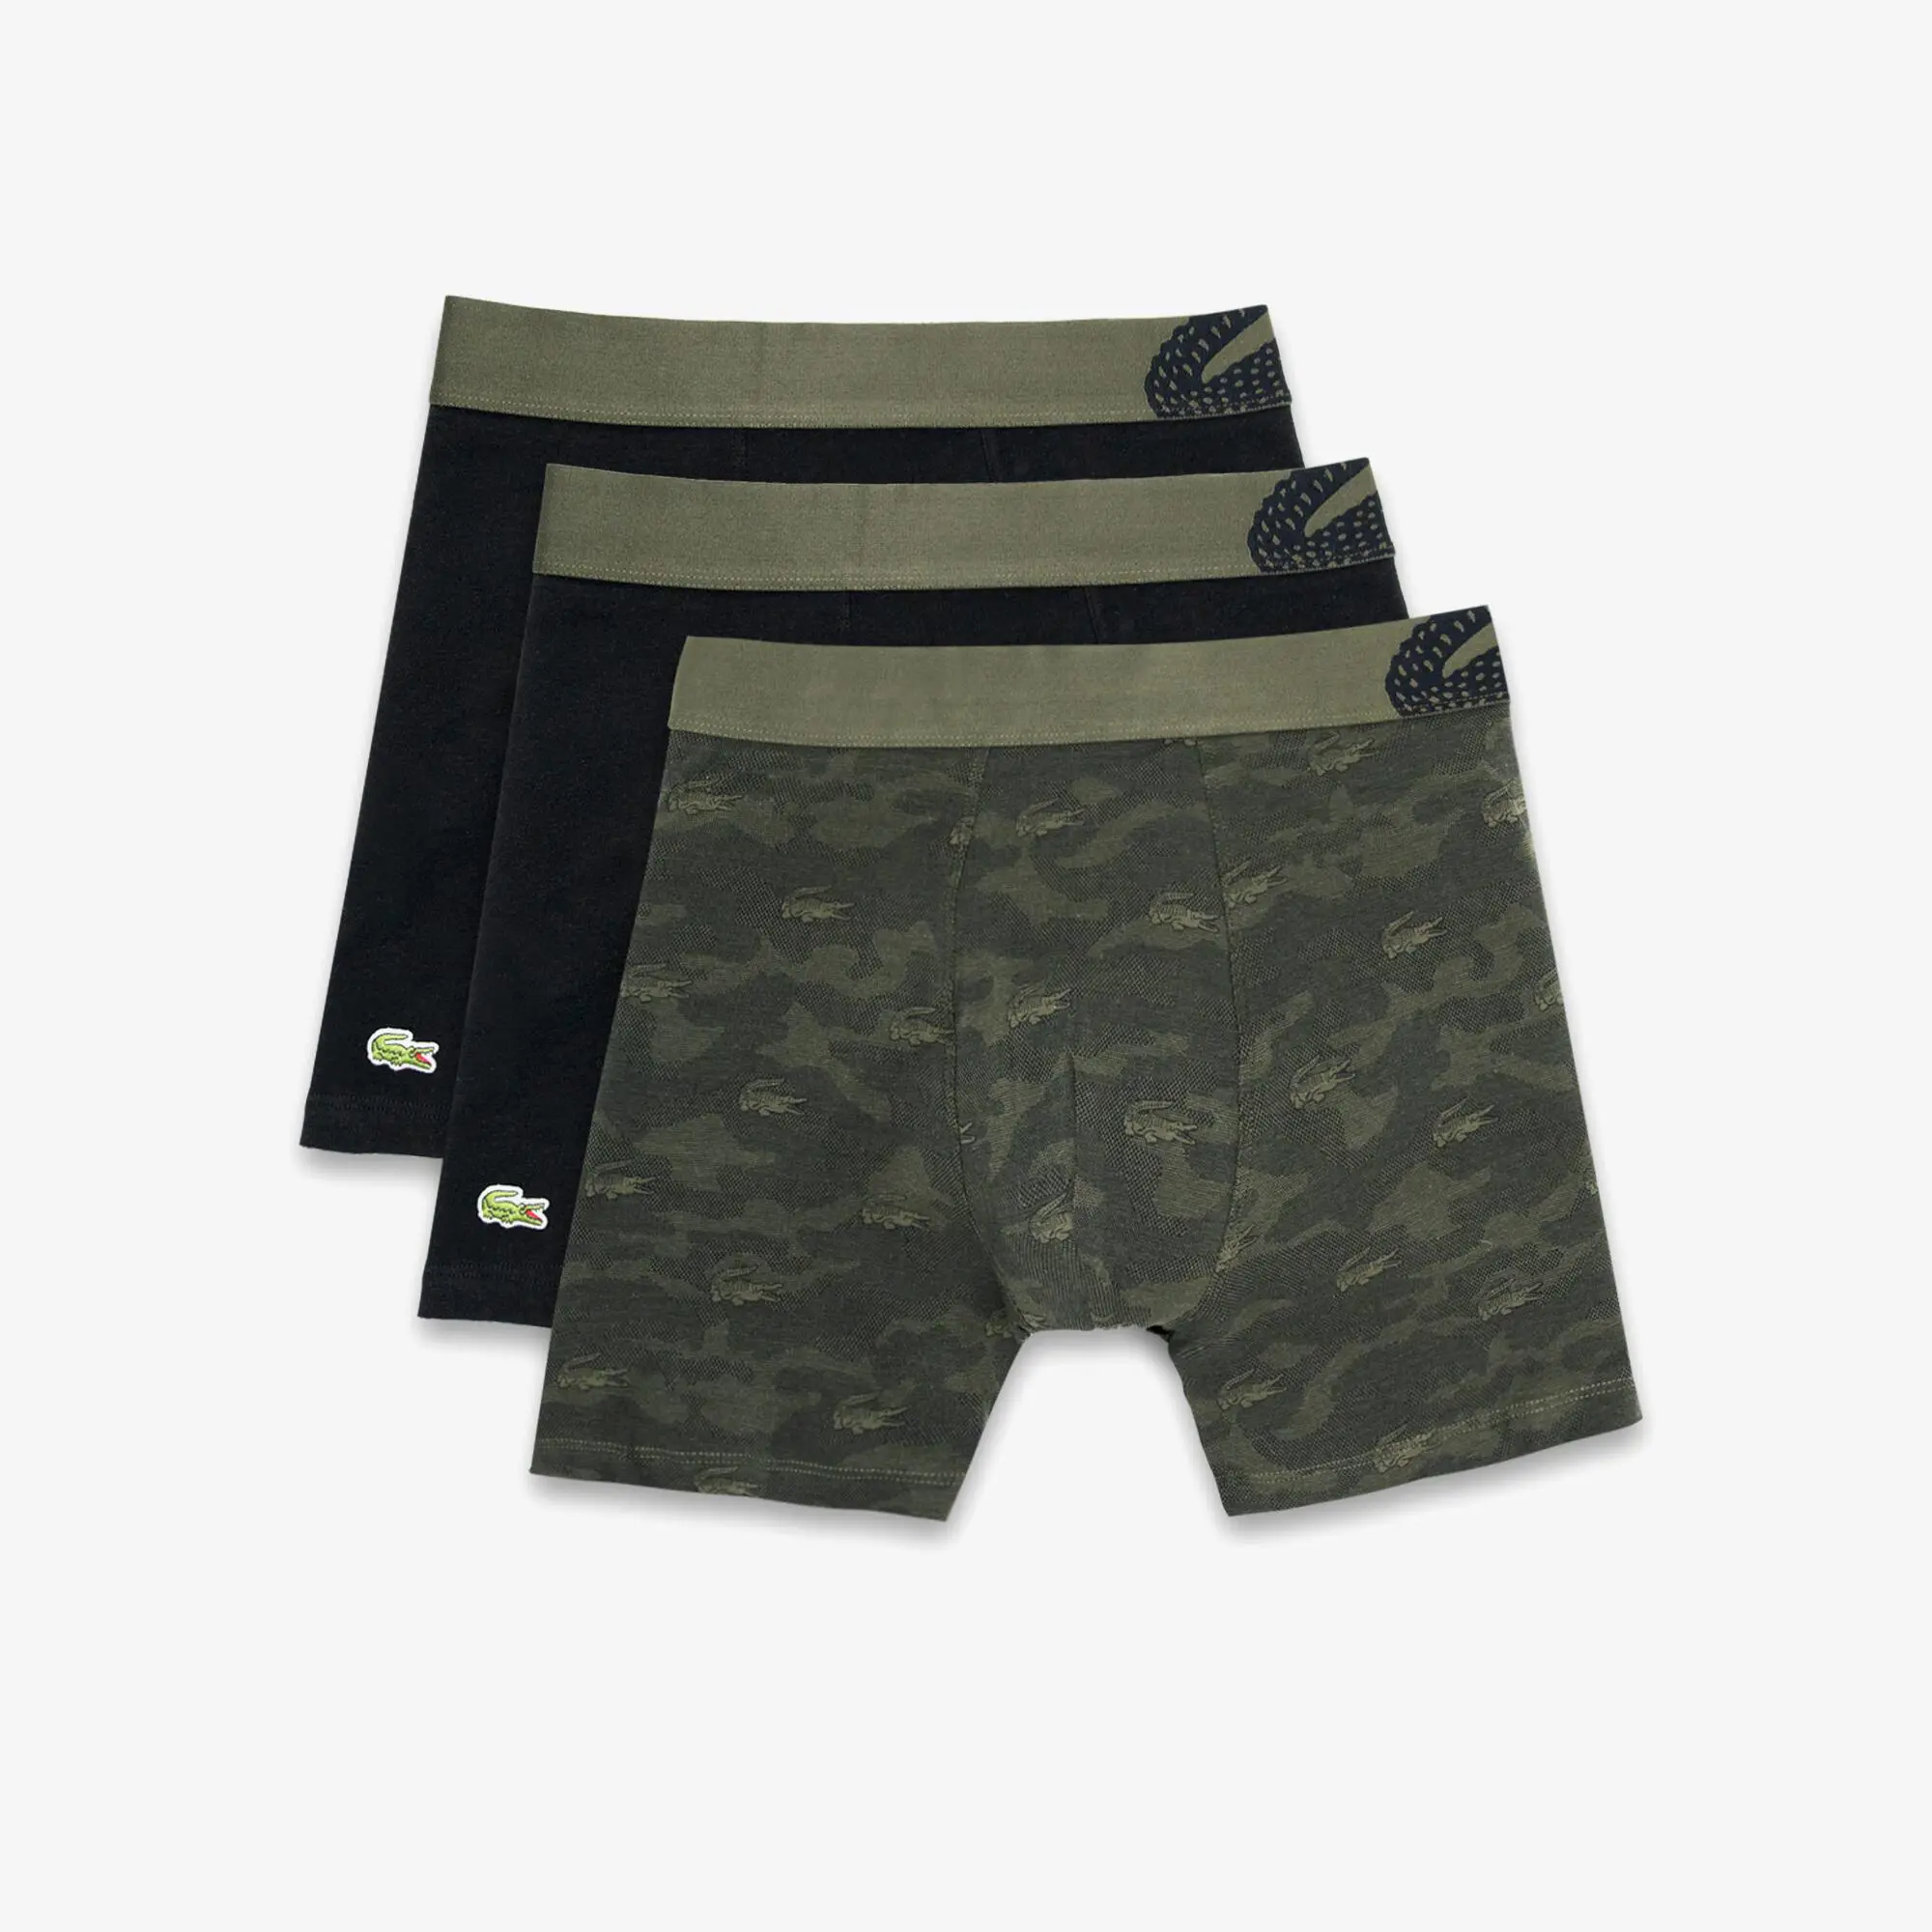 Lacoste Men’s Camouflage Print Boxer Brief 3-Pack. 1